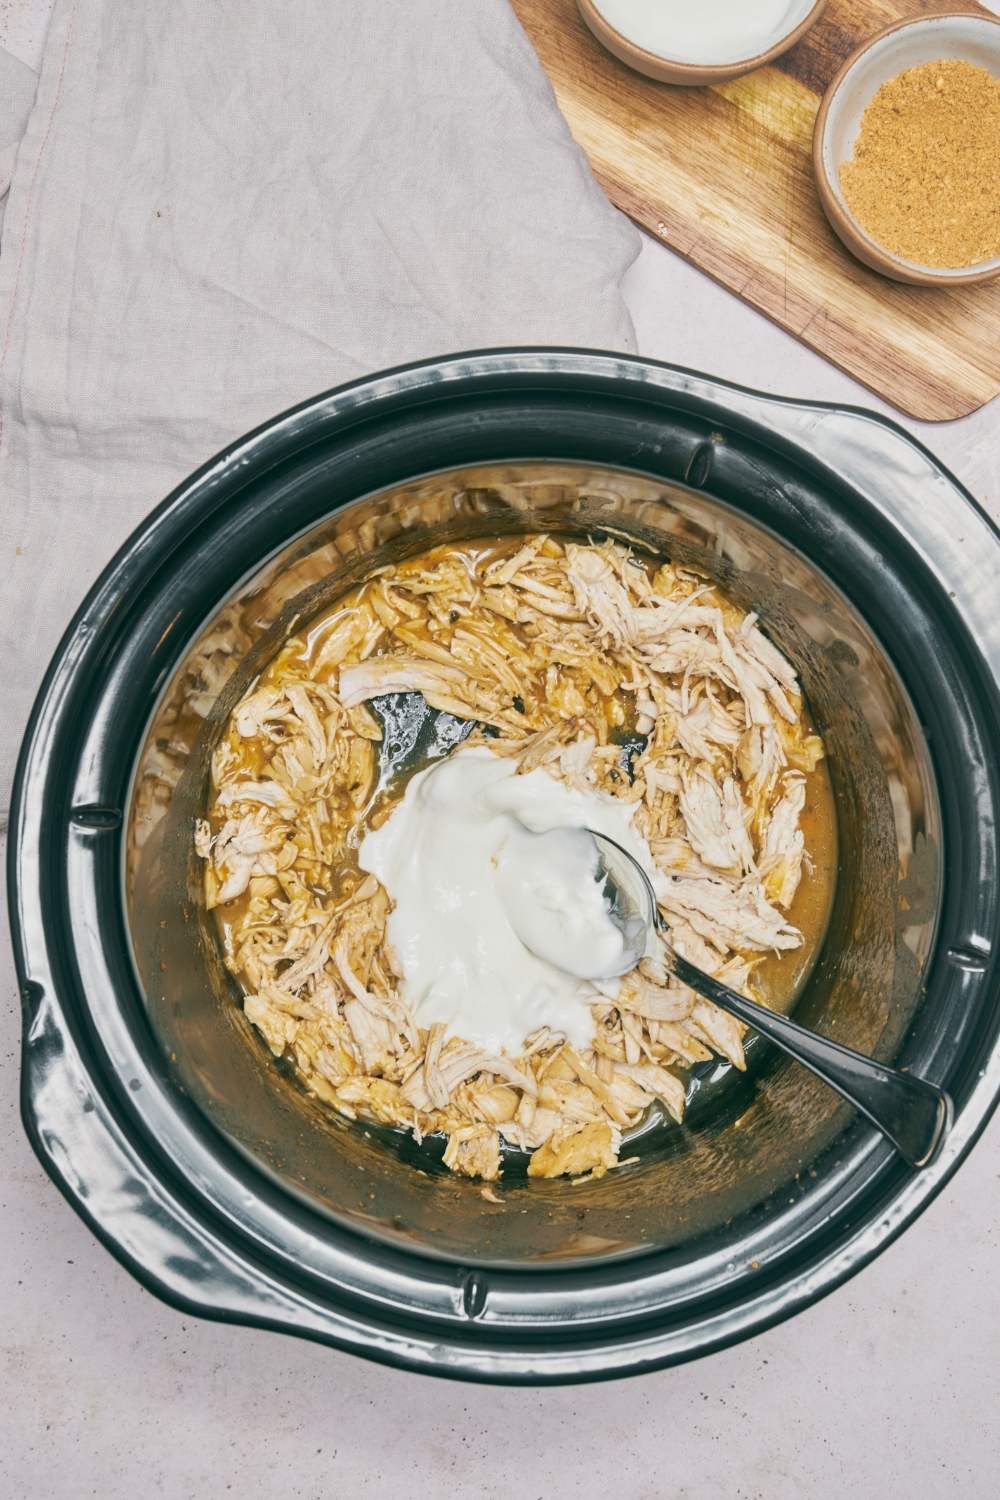 A slow cooker filled with shredded chicken in gravy and a spoonful of sour cream has been added to the slow cooker.